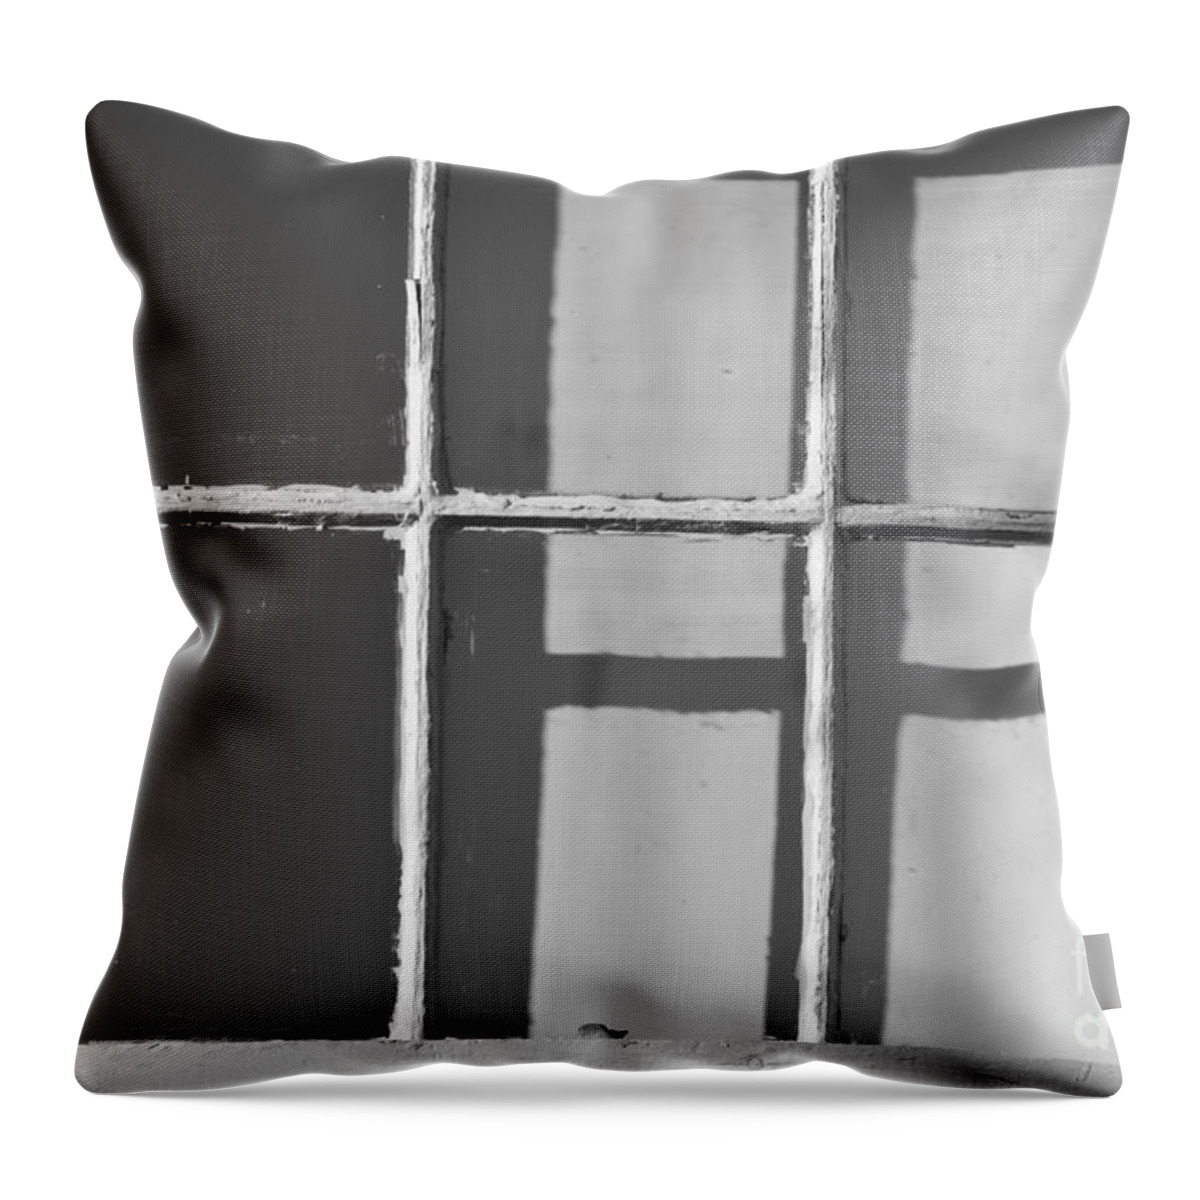 Abstract Throw Pillow featuring the photograph Abstract Window in Light and Shadow by David Gordon